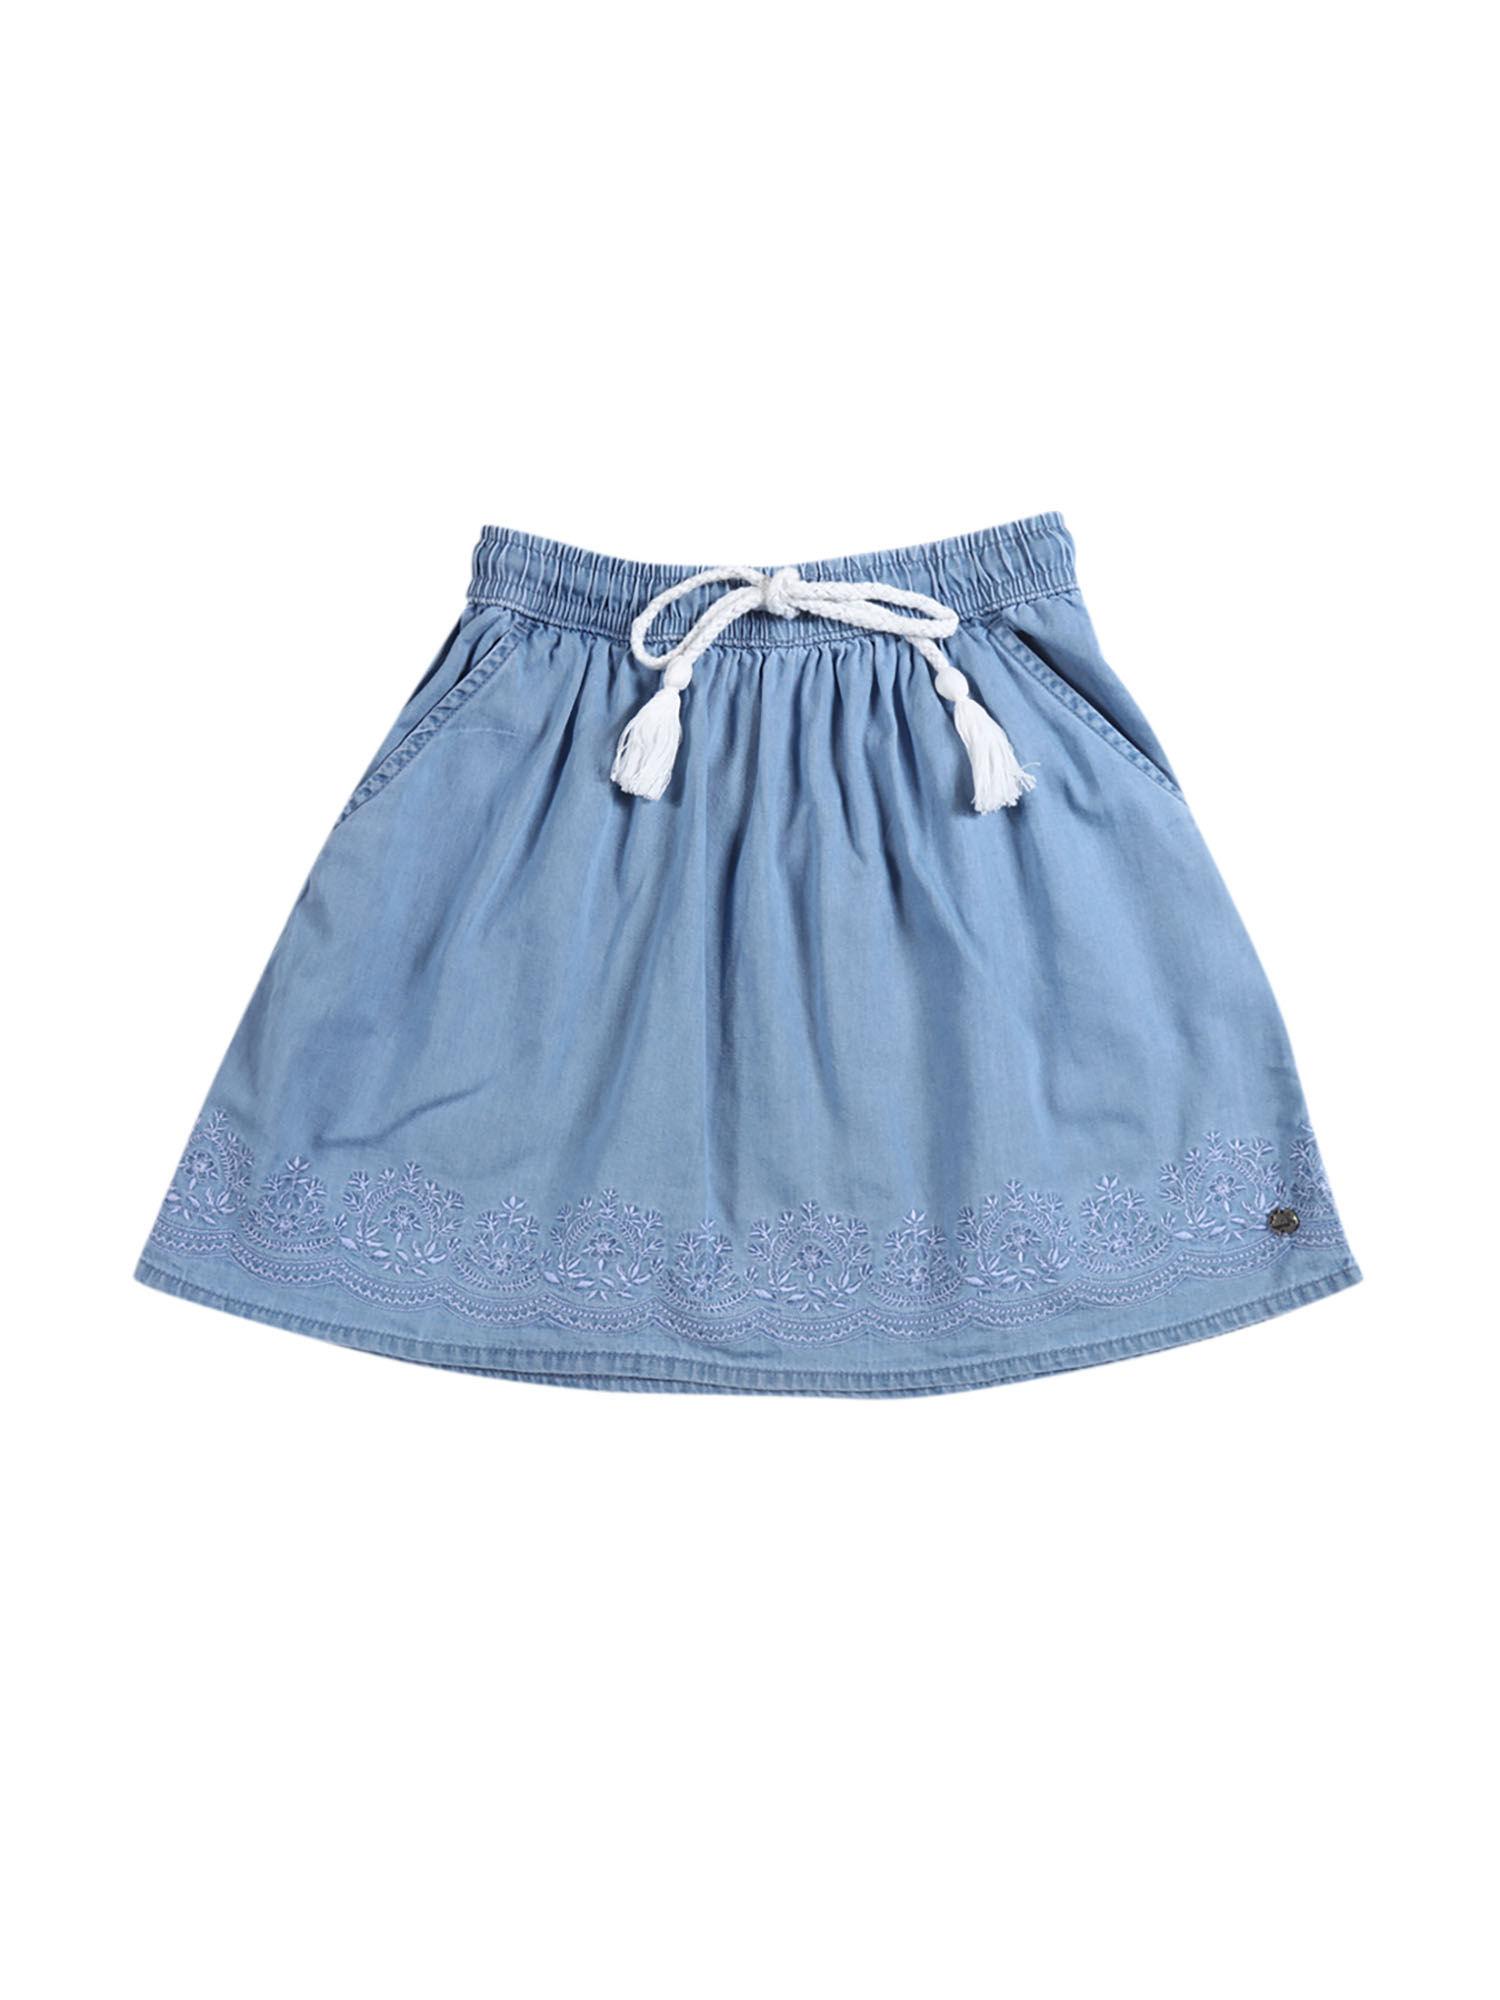 blue color embroidered skirt